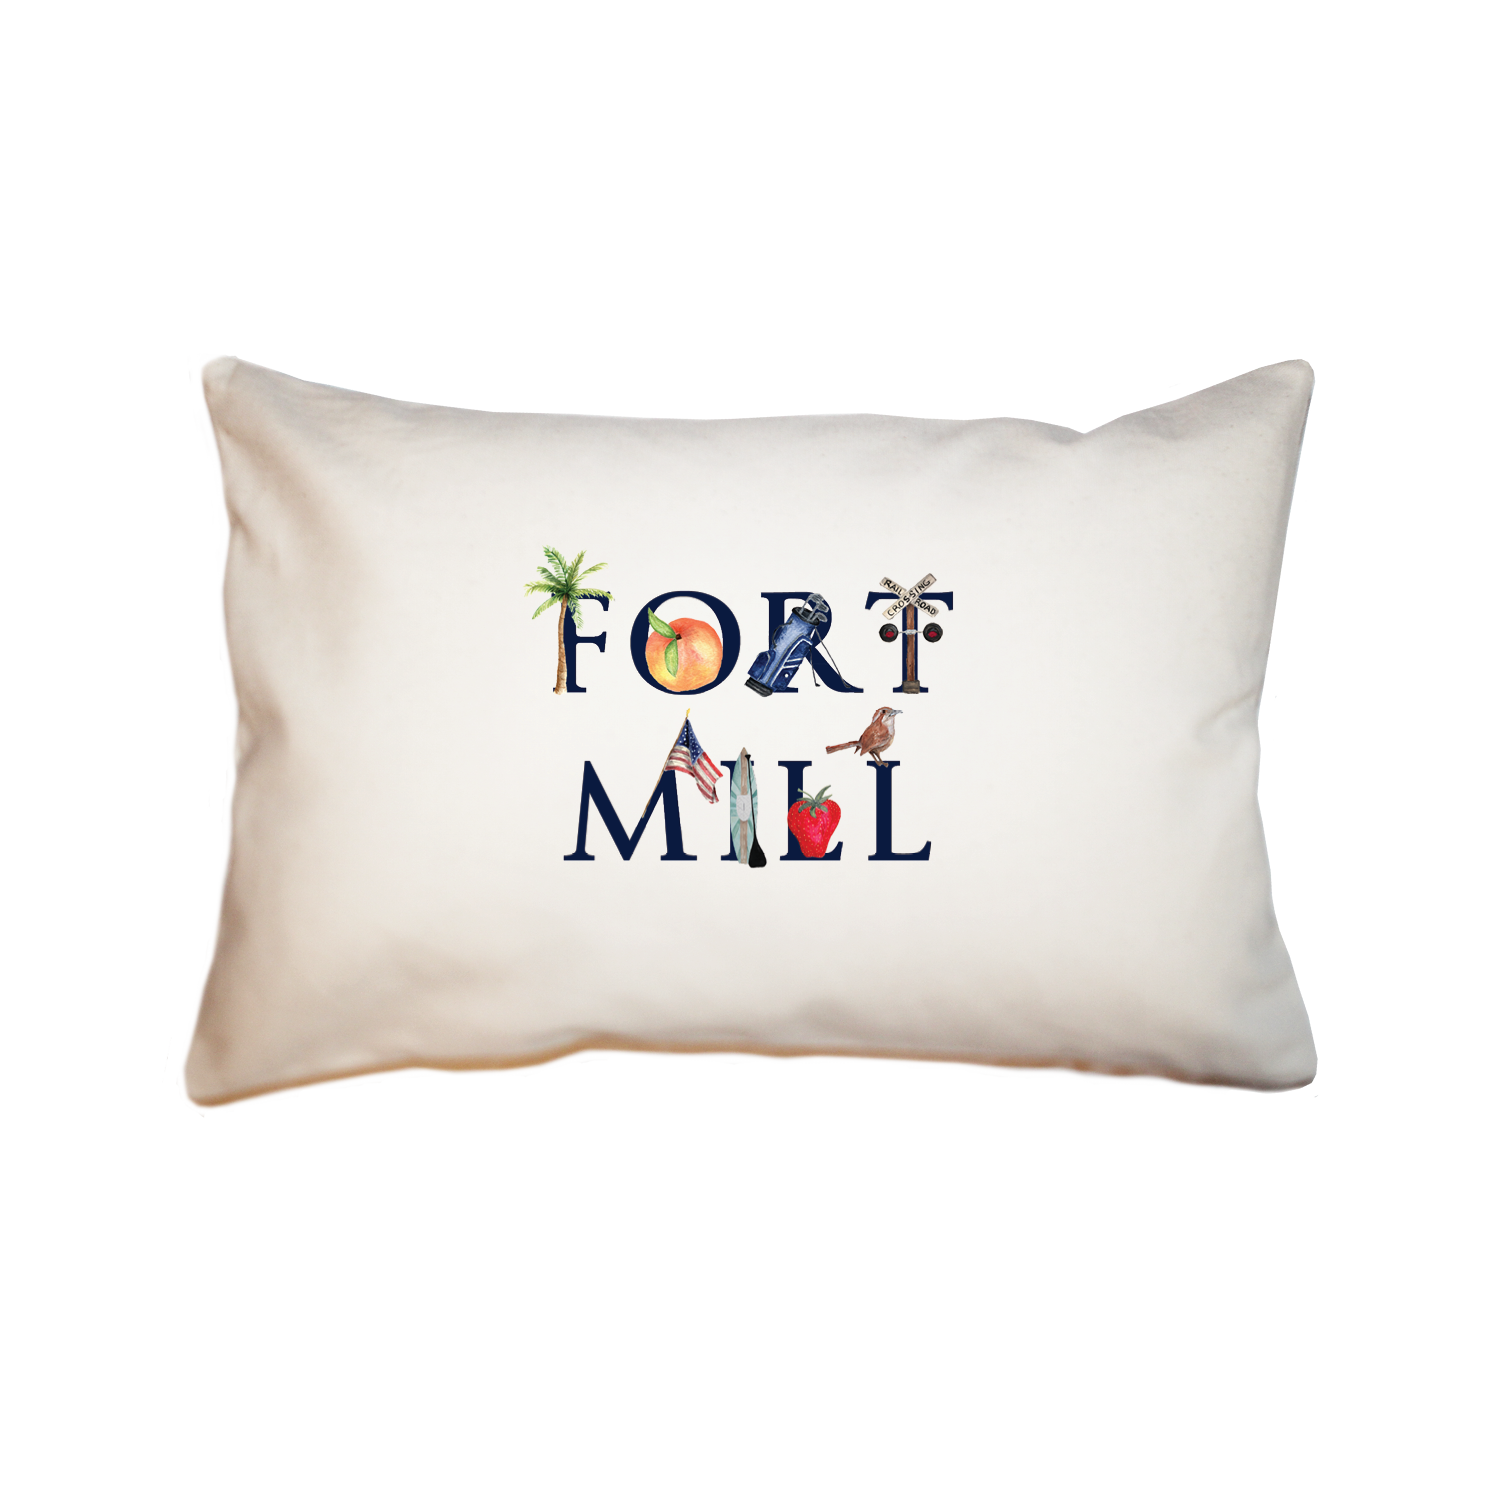 fort mill large rectangle pillow